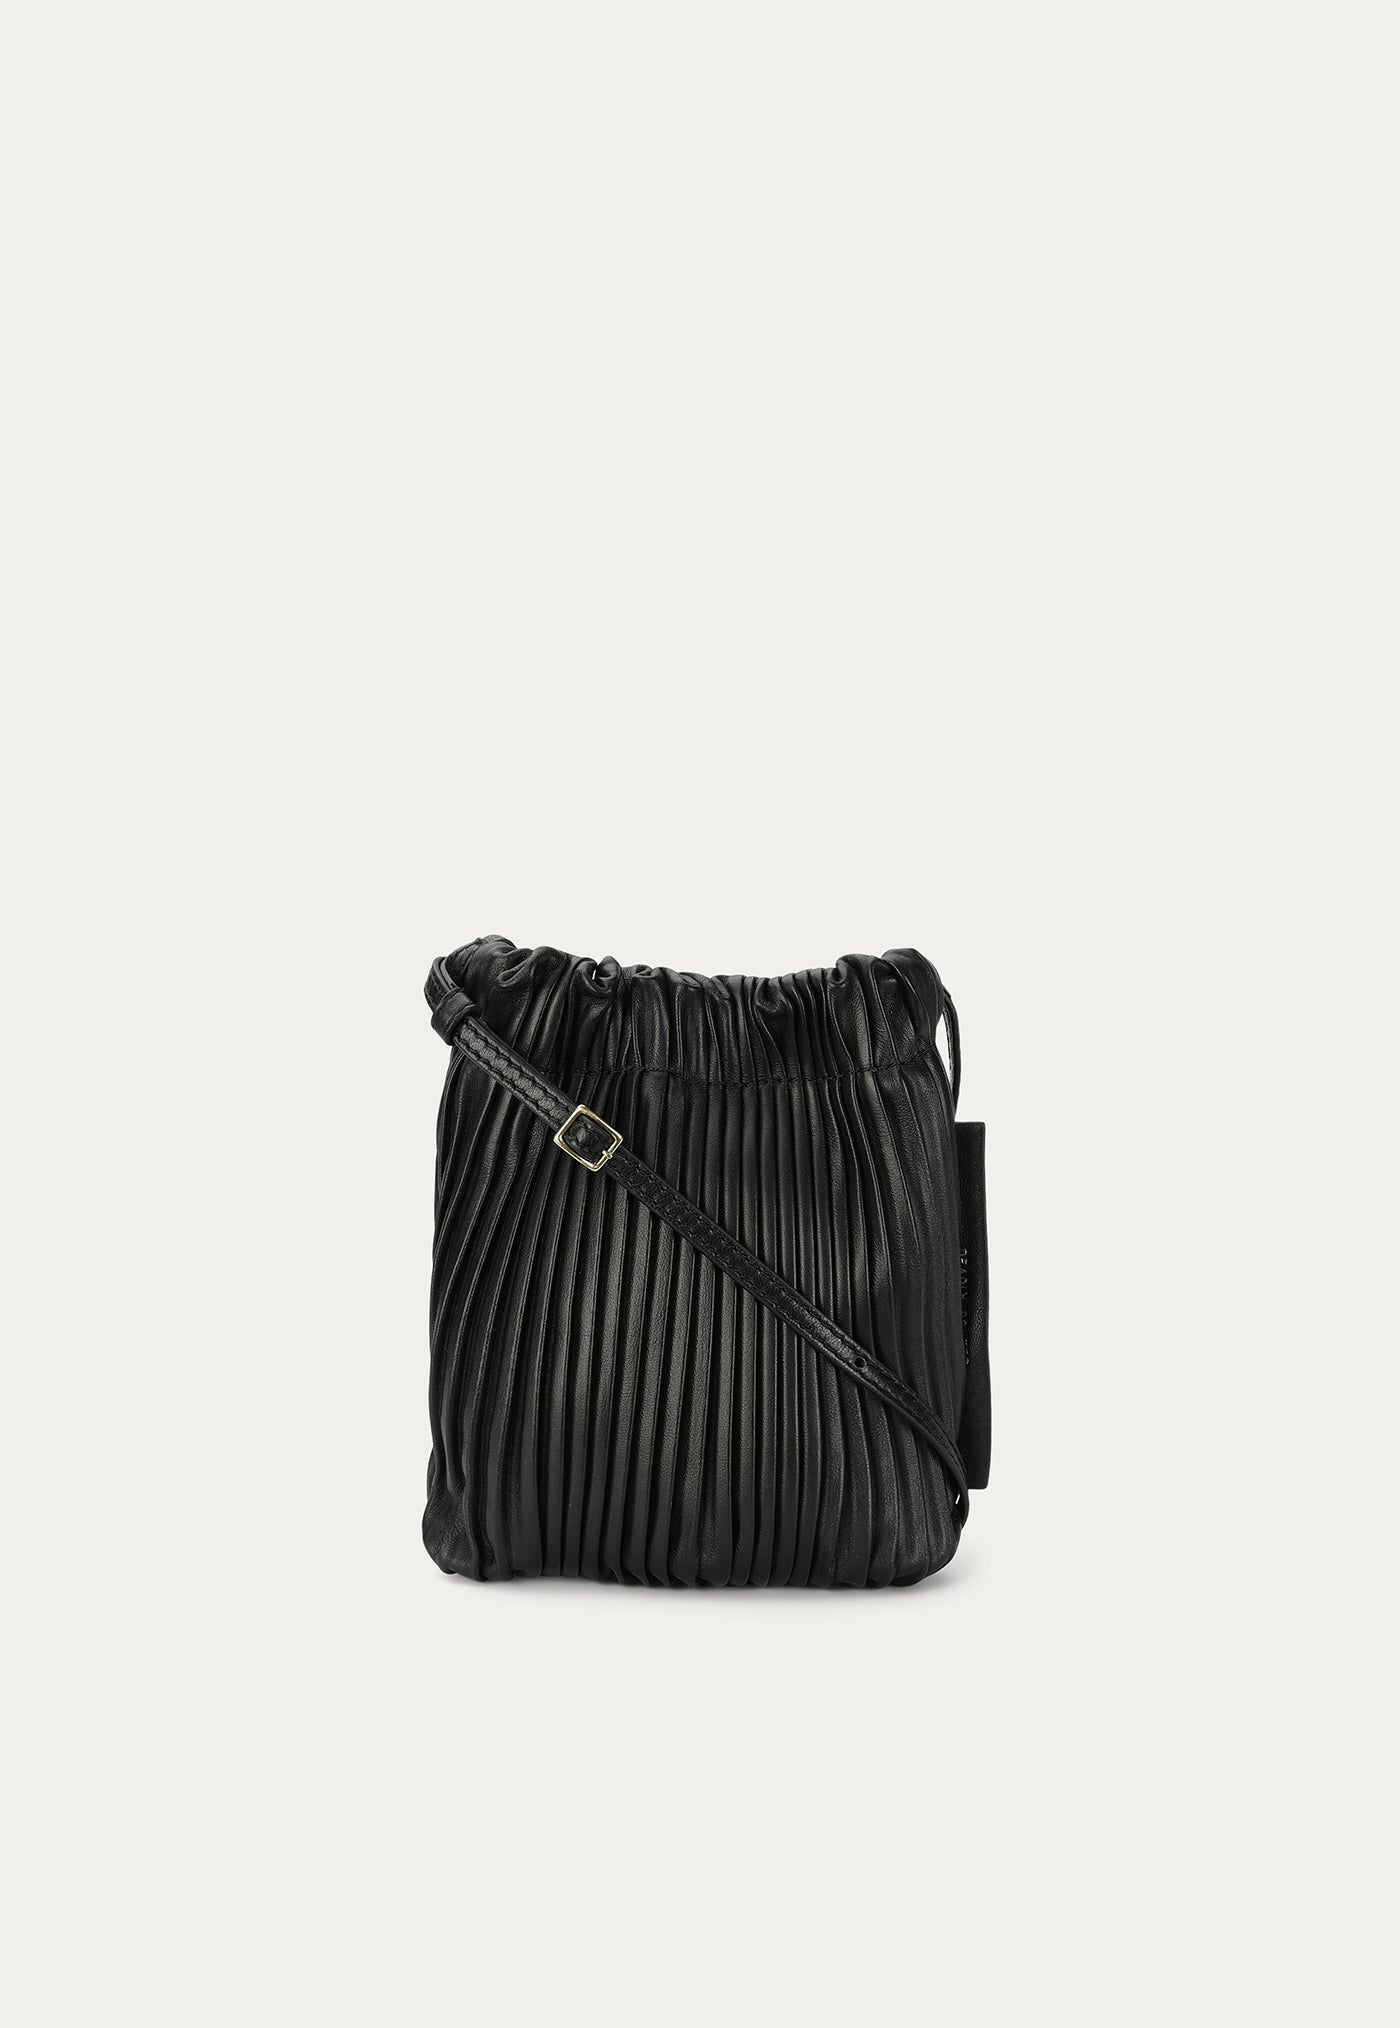 Mr Cinch Pouch - Black Pleated sold by Angel Divine